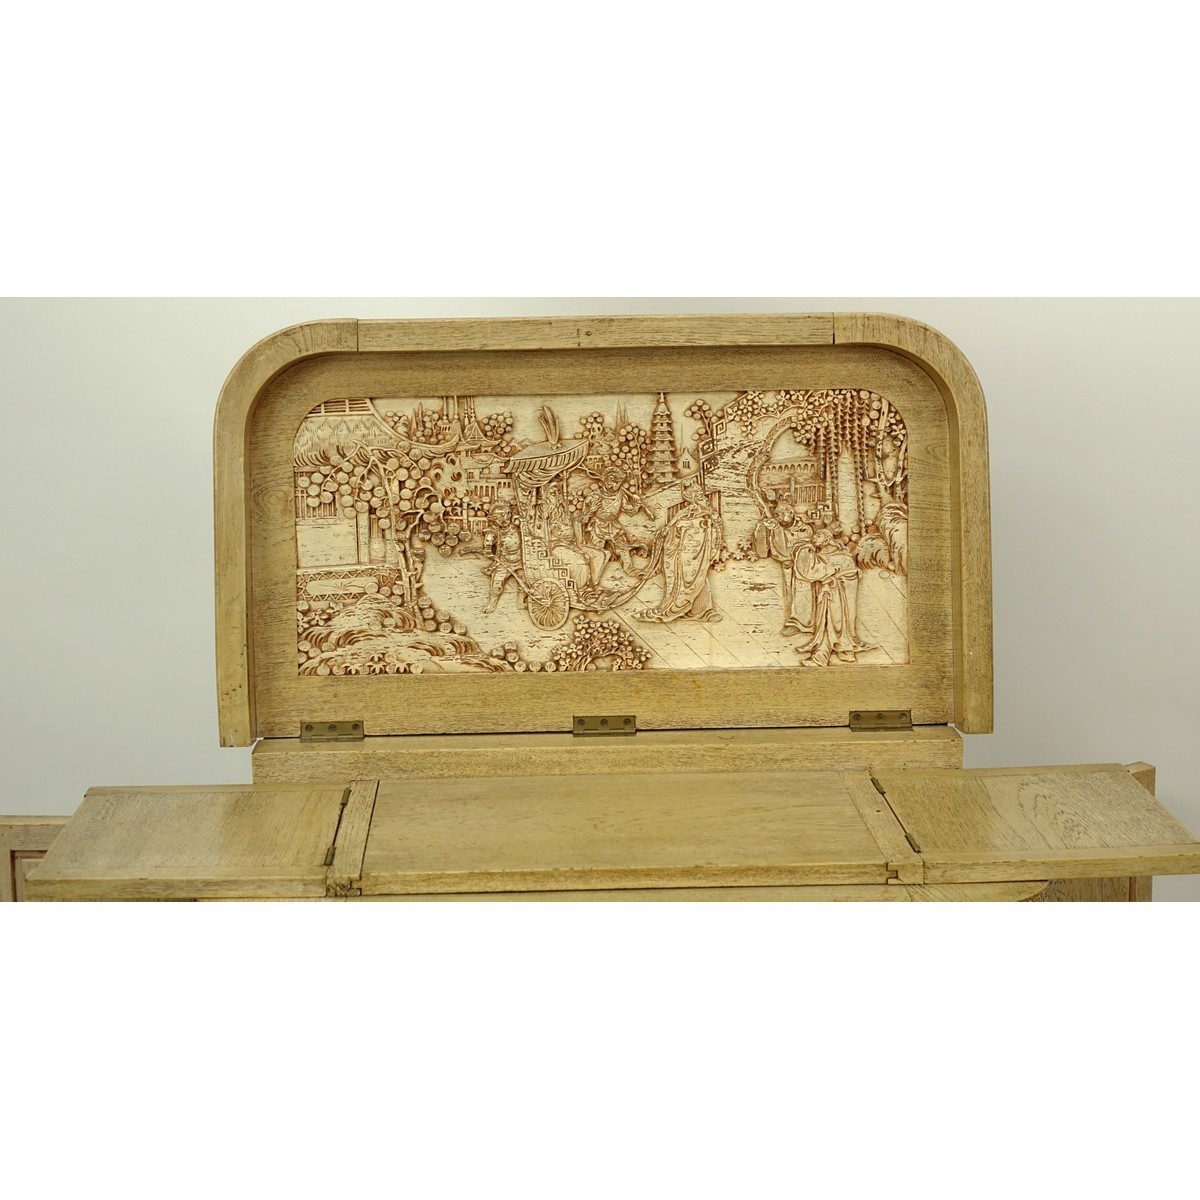 Vintage Chinese Motif Carved Wood Liquor Cabinet. Top lifts to reveal busy carved scene and fold out panels for serving.